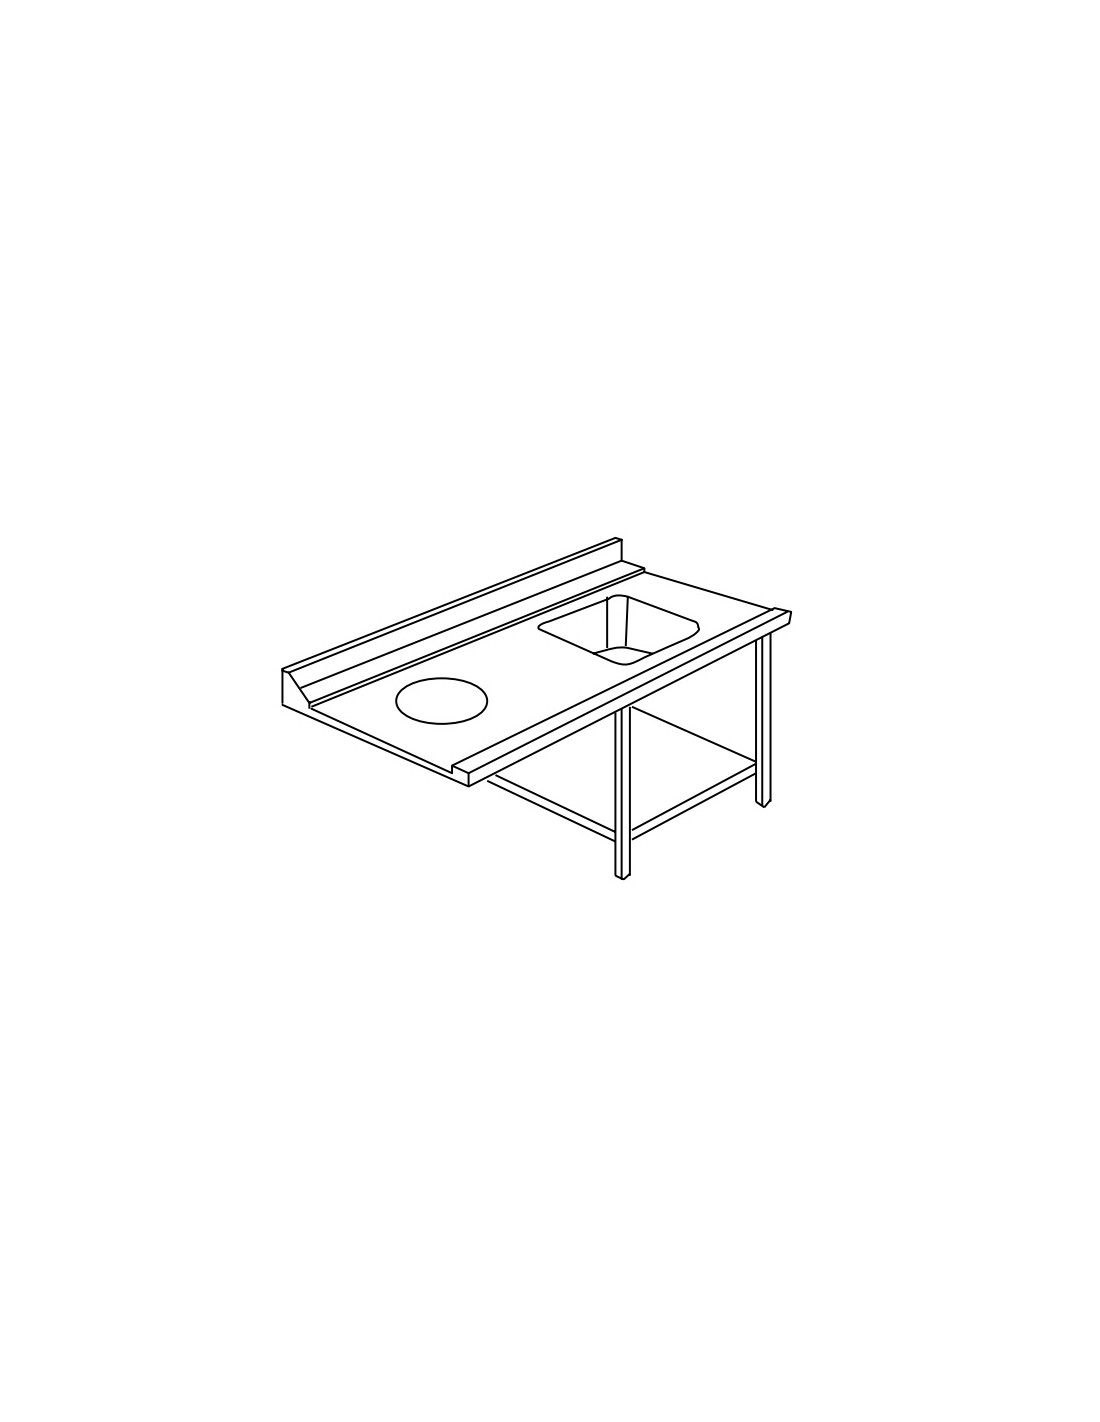 Entrance table cm 121 x 78 right sorting hole